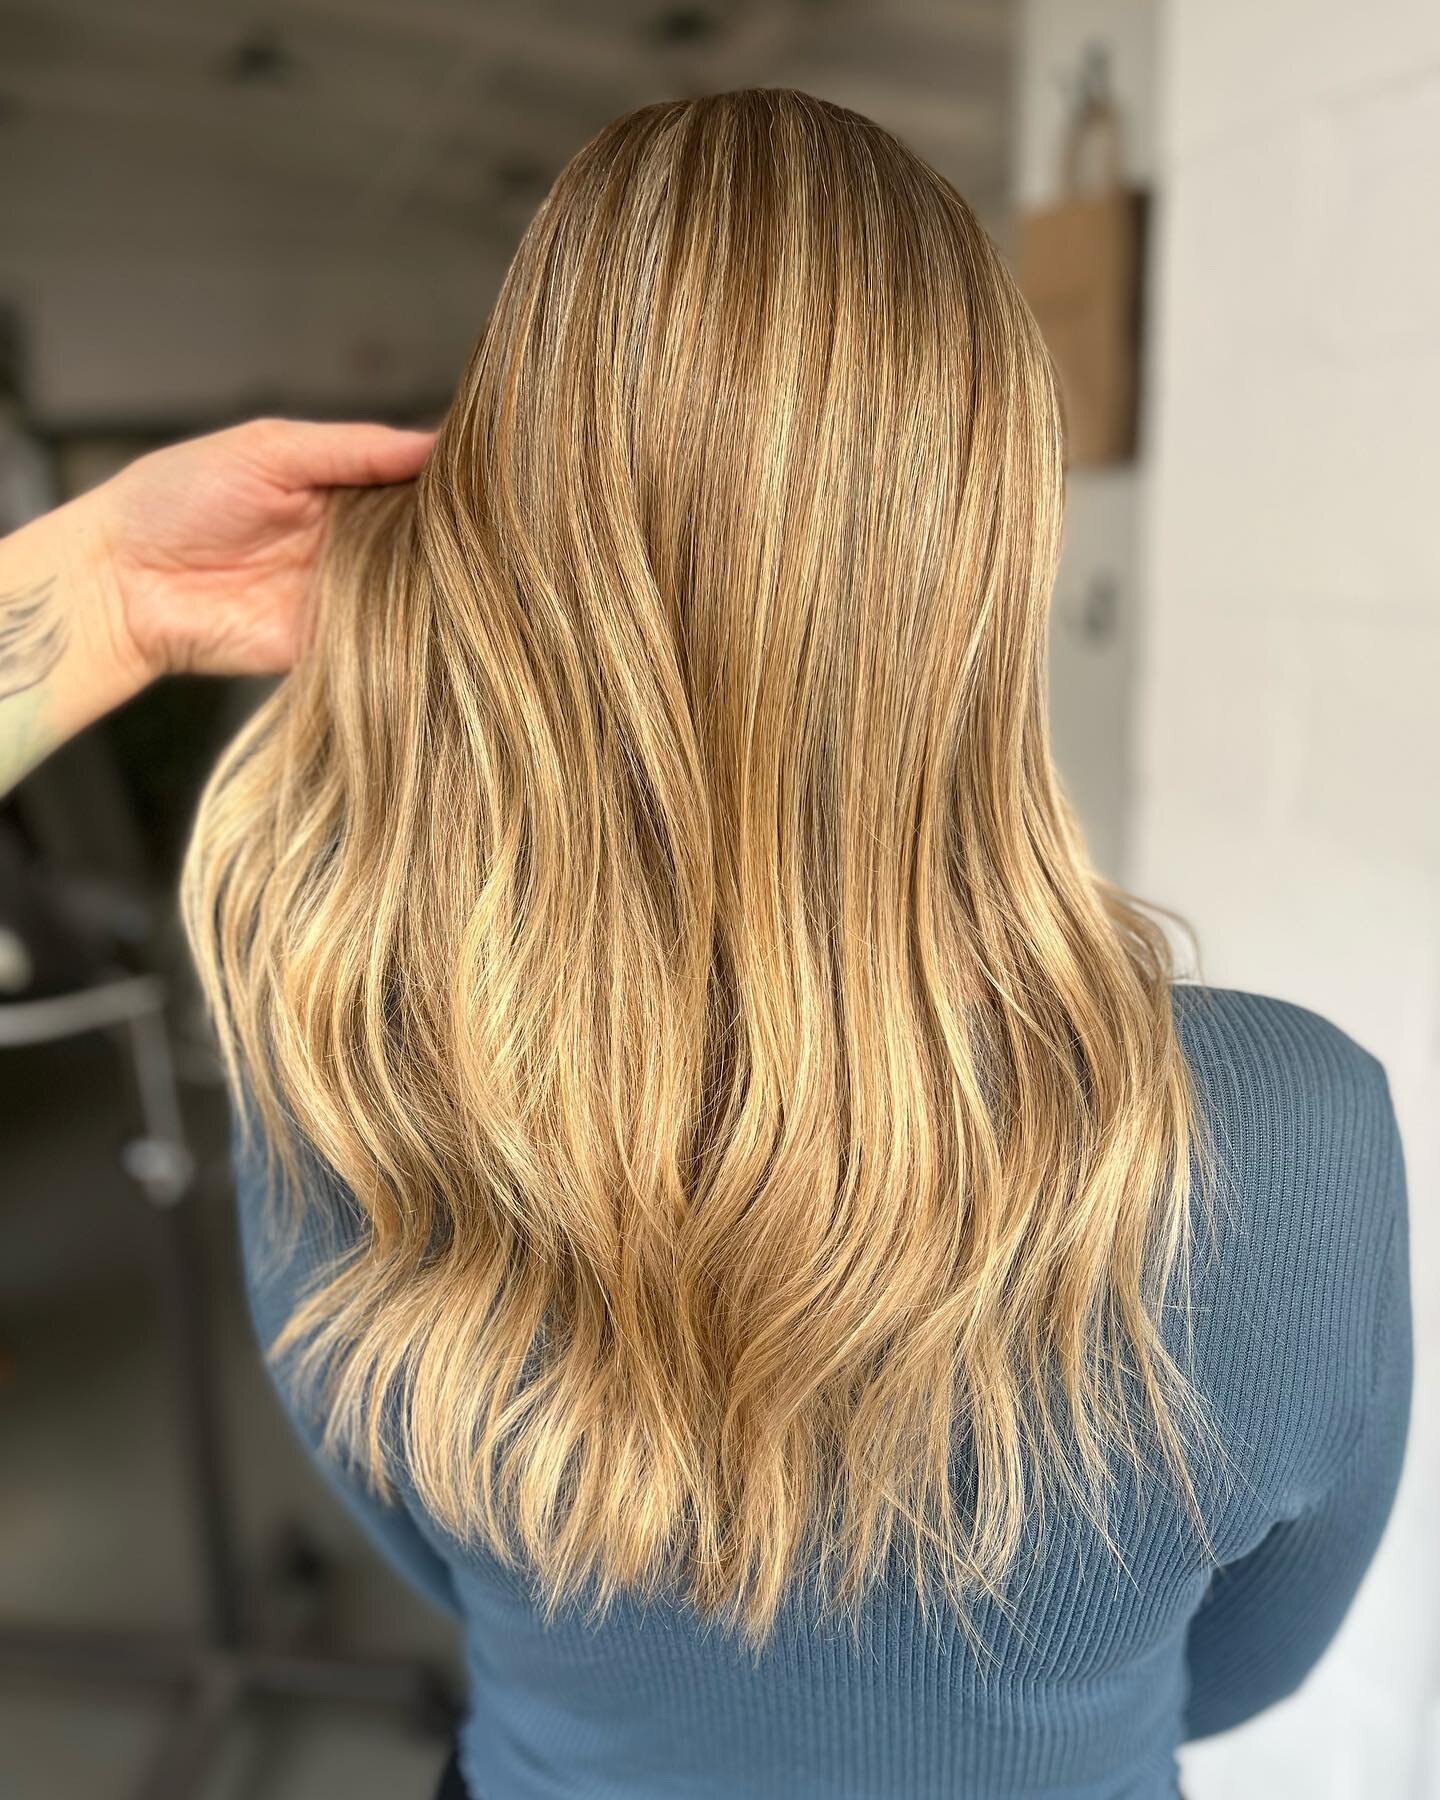 Jumped ahead one hour, and now we closer to spring. Where are all my blondes at?

@amy_farkas 

#thecognitivecolorist#blonde#blondehair#foiledhair#roottap#balayage#paulmitchelldemi#schwarzkopfclaylightener#joicoblondelife#malibuhardwatertreatment